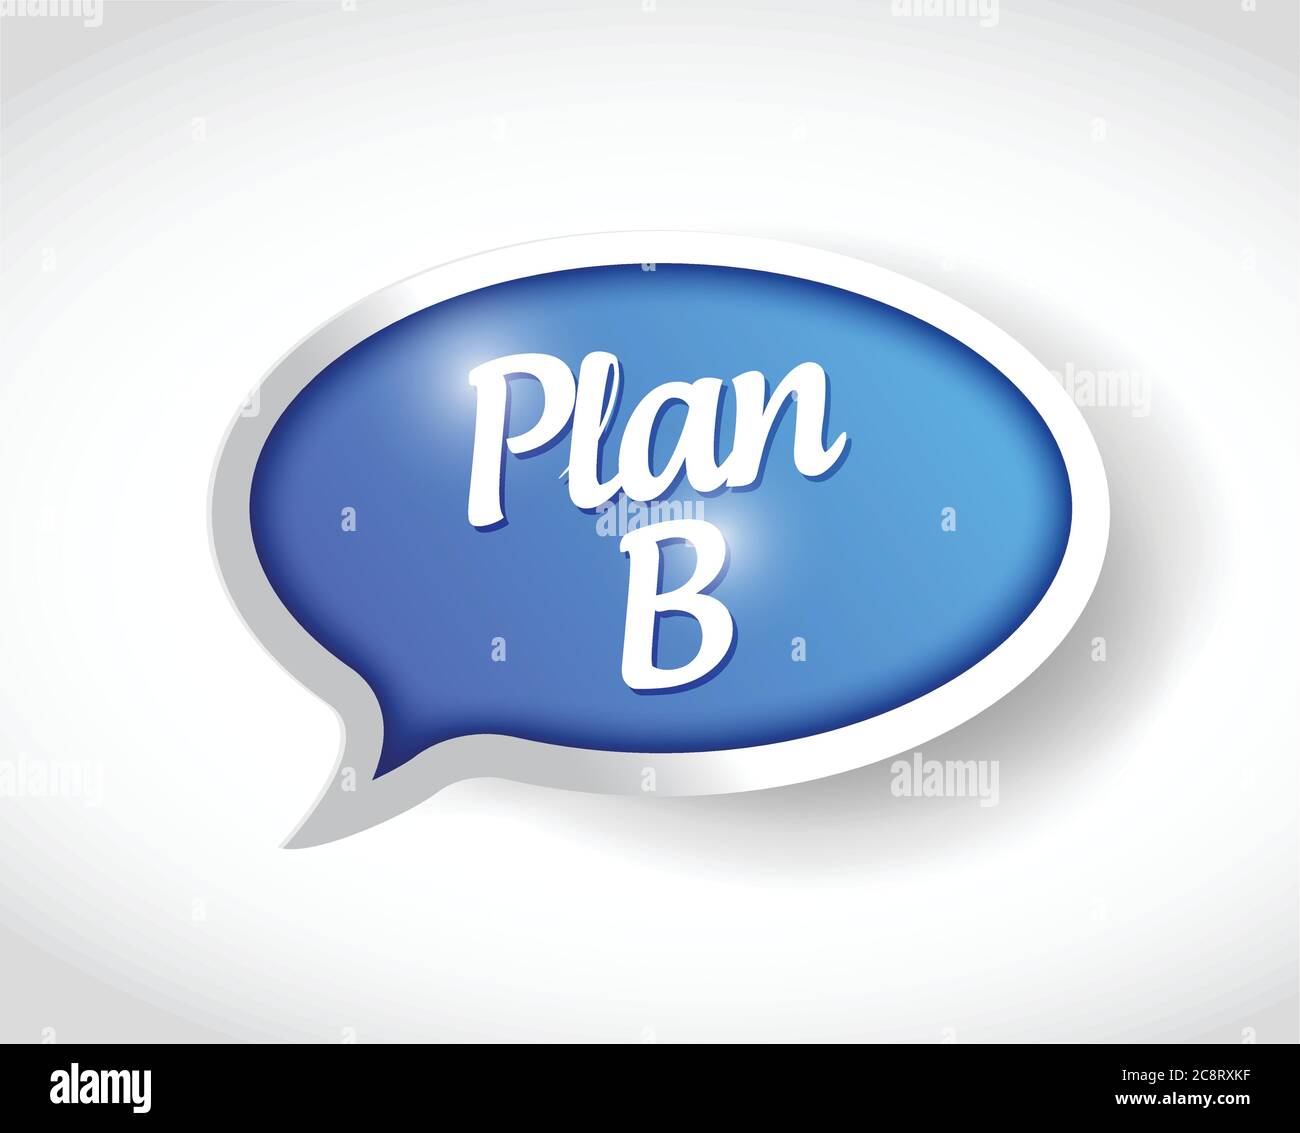 Plan b message bubble illustration design over a white background Stock Vector